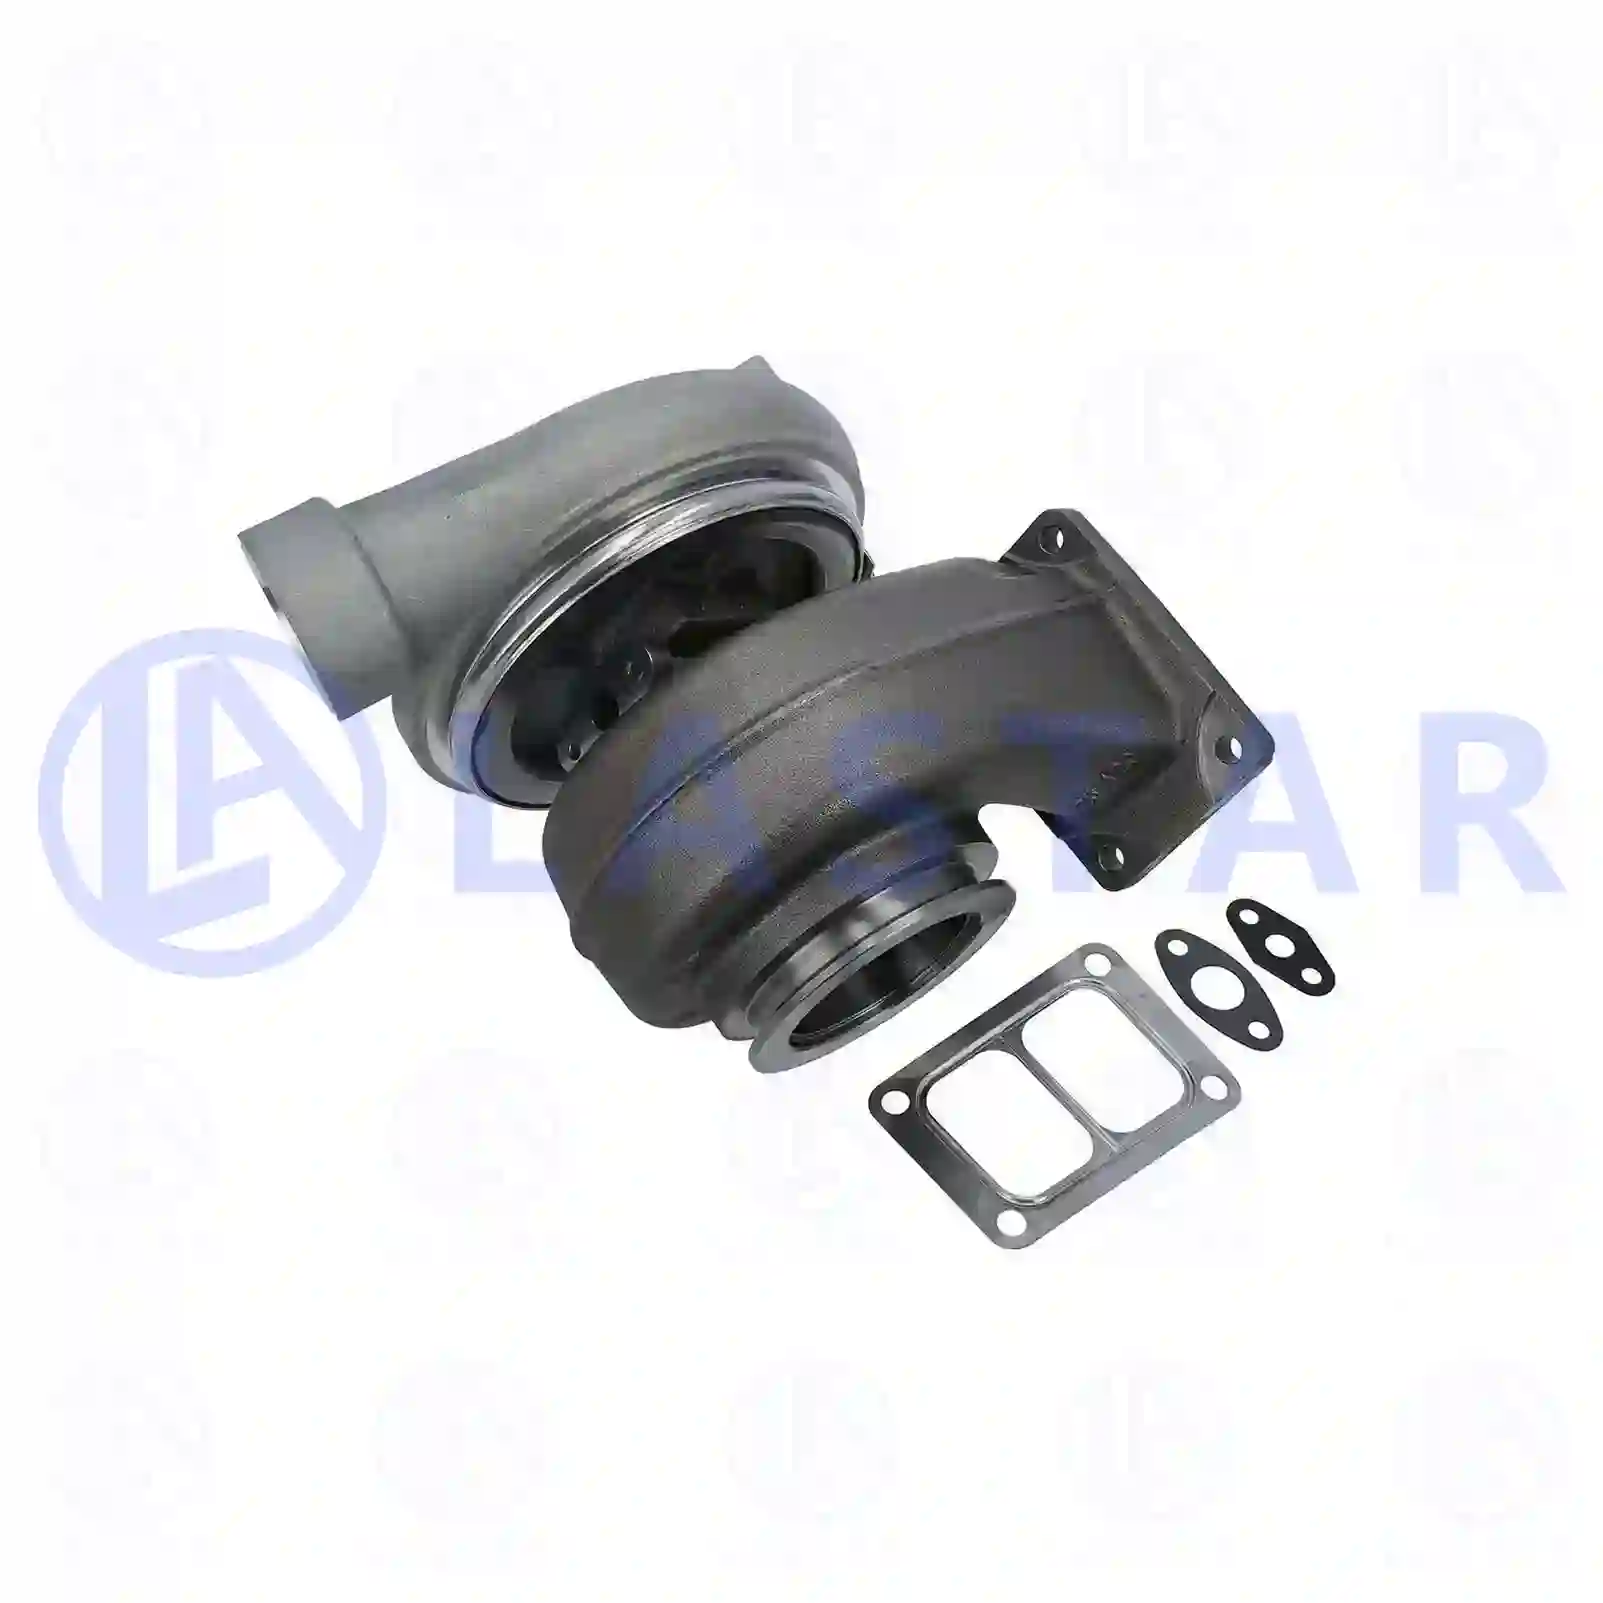 Turbocharger, with gasket kit, 77701540, 1547957, 1676089, 1677098, 1677725, 1677726, 20516531, 3165219, 3964637, 4027013, 425720, 425777, 8048873, 8112637, 8112682, 8112921, 8113121, 8113407, 8116121, 8119121, 8119407, 8148873, 8148973, 8148987, 85000772, ZG02211-0008 ||  77701540 Lastar Spare Part | Truck Spare Parts, Auotomotive Spare Parts Turbocharger, with gasket kit, 77701540, 1547957, 1676089, 1677098, 1677725, 1677726, 20516531, 3165219, 3964637, 4027013, 425720, 425777, 8048873, 8112637, 8112682, 8112921, 8113121, 8113407, 8116121, 8119121, 8119407, 8148873, 8148973, 8148987, 85000772, ZG02211-0008 ||  77701540 Lastar Spare Part | Truck Spare Parts, Auotomotive Spare Parts